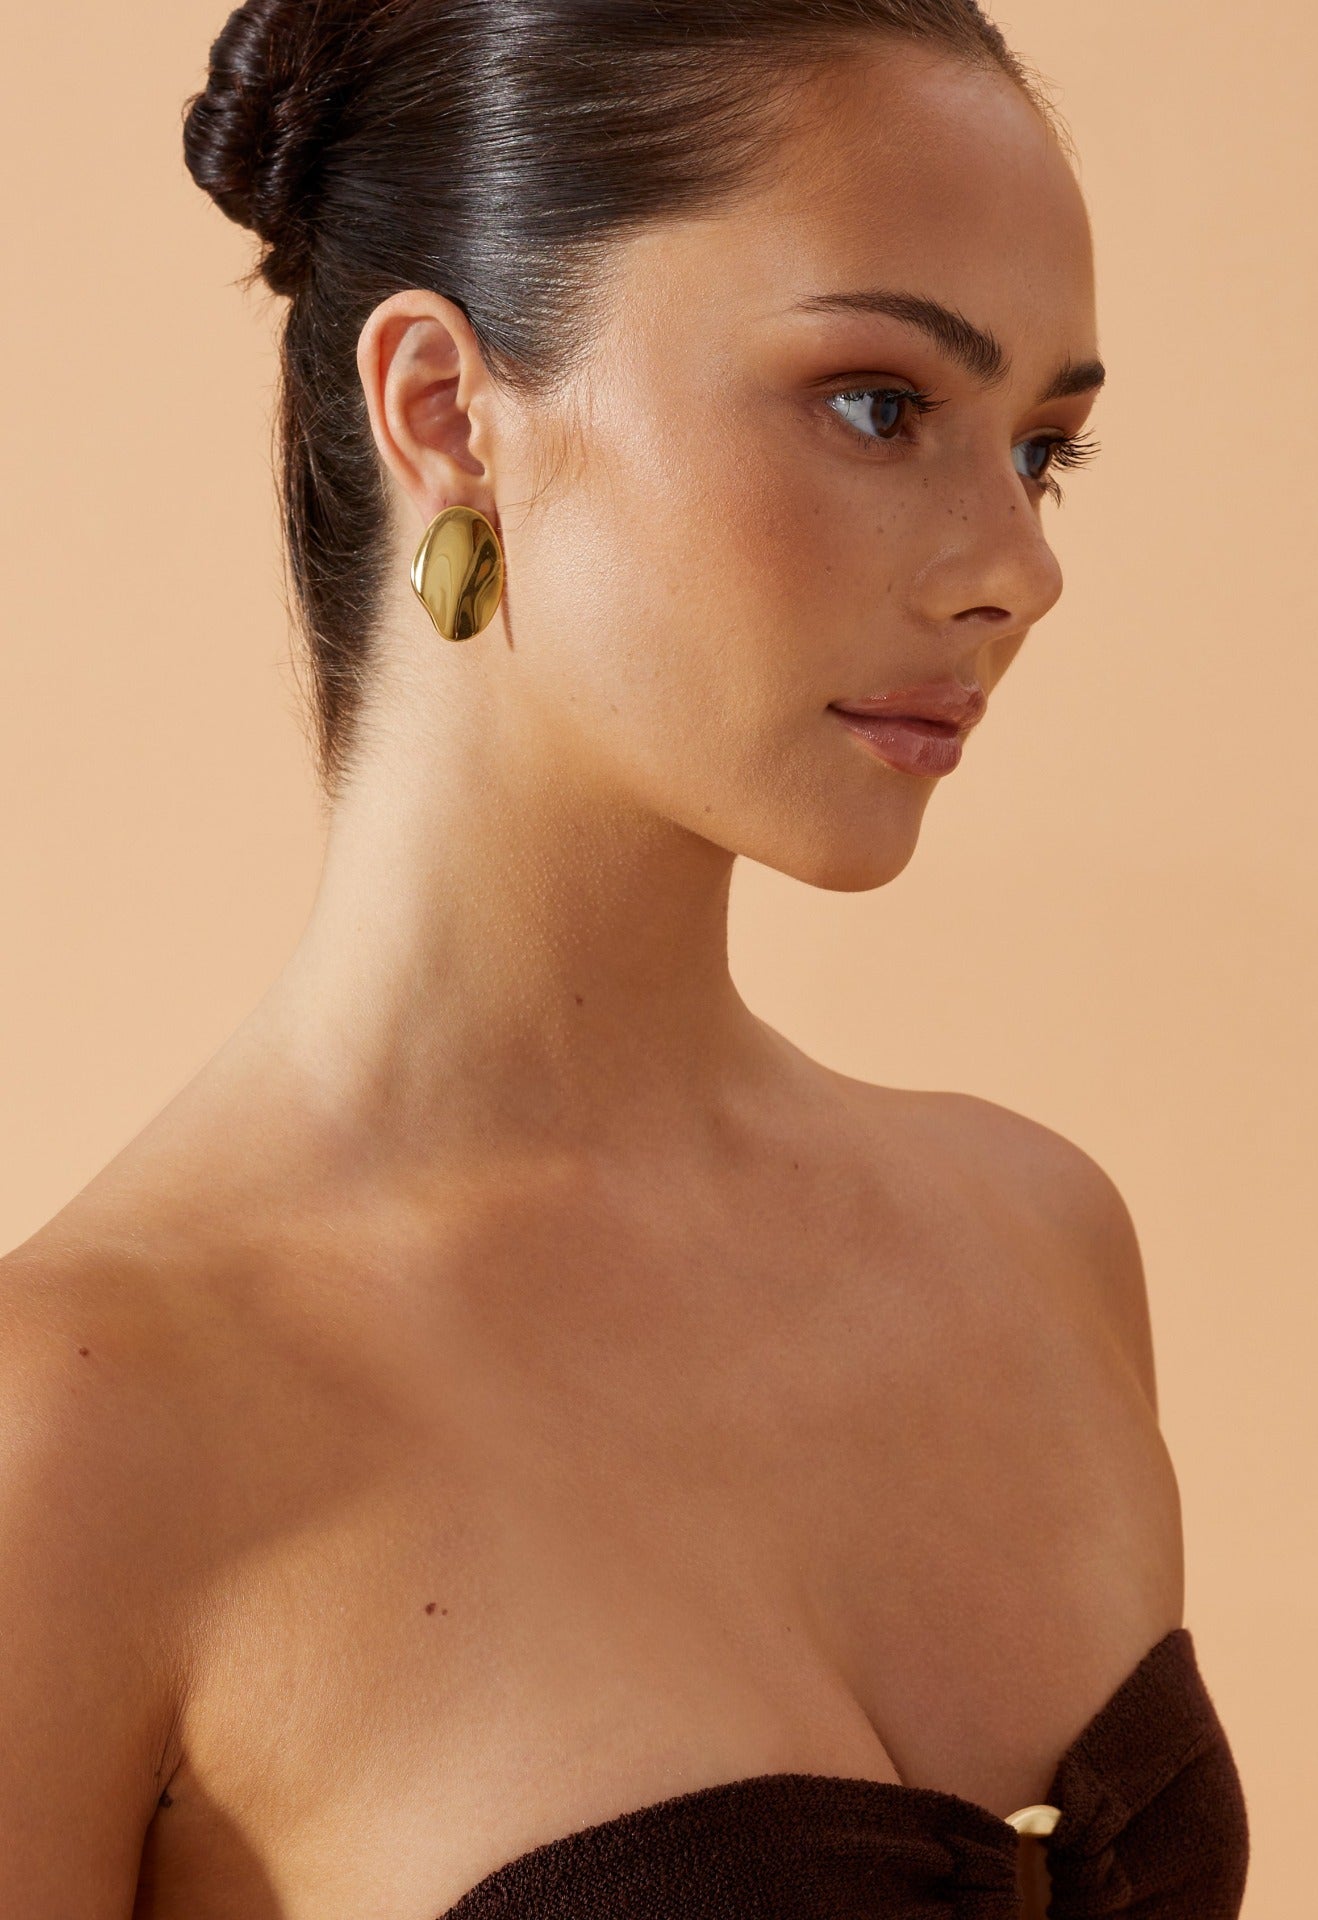 Flook The Label X Iza Jewelry Lumen Gold plated earrings, cushion cllosure at the back